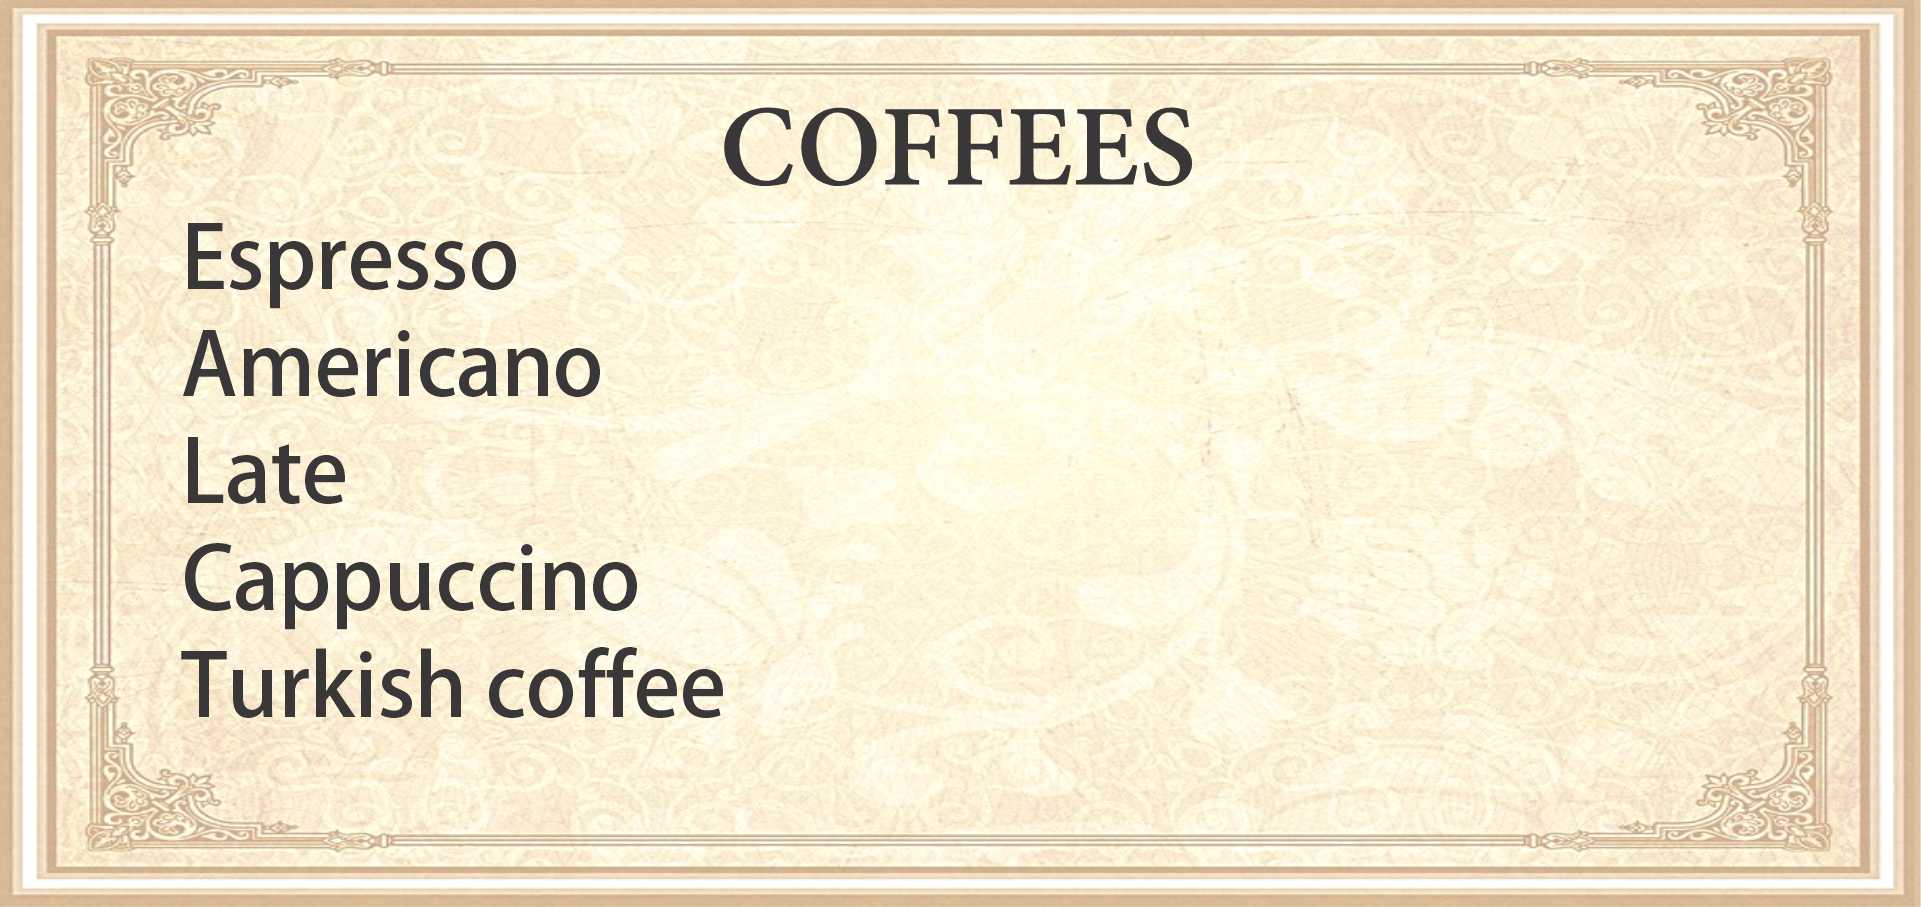 Coffees